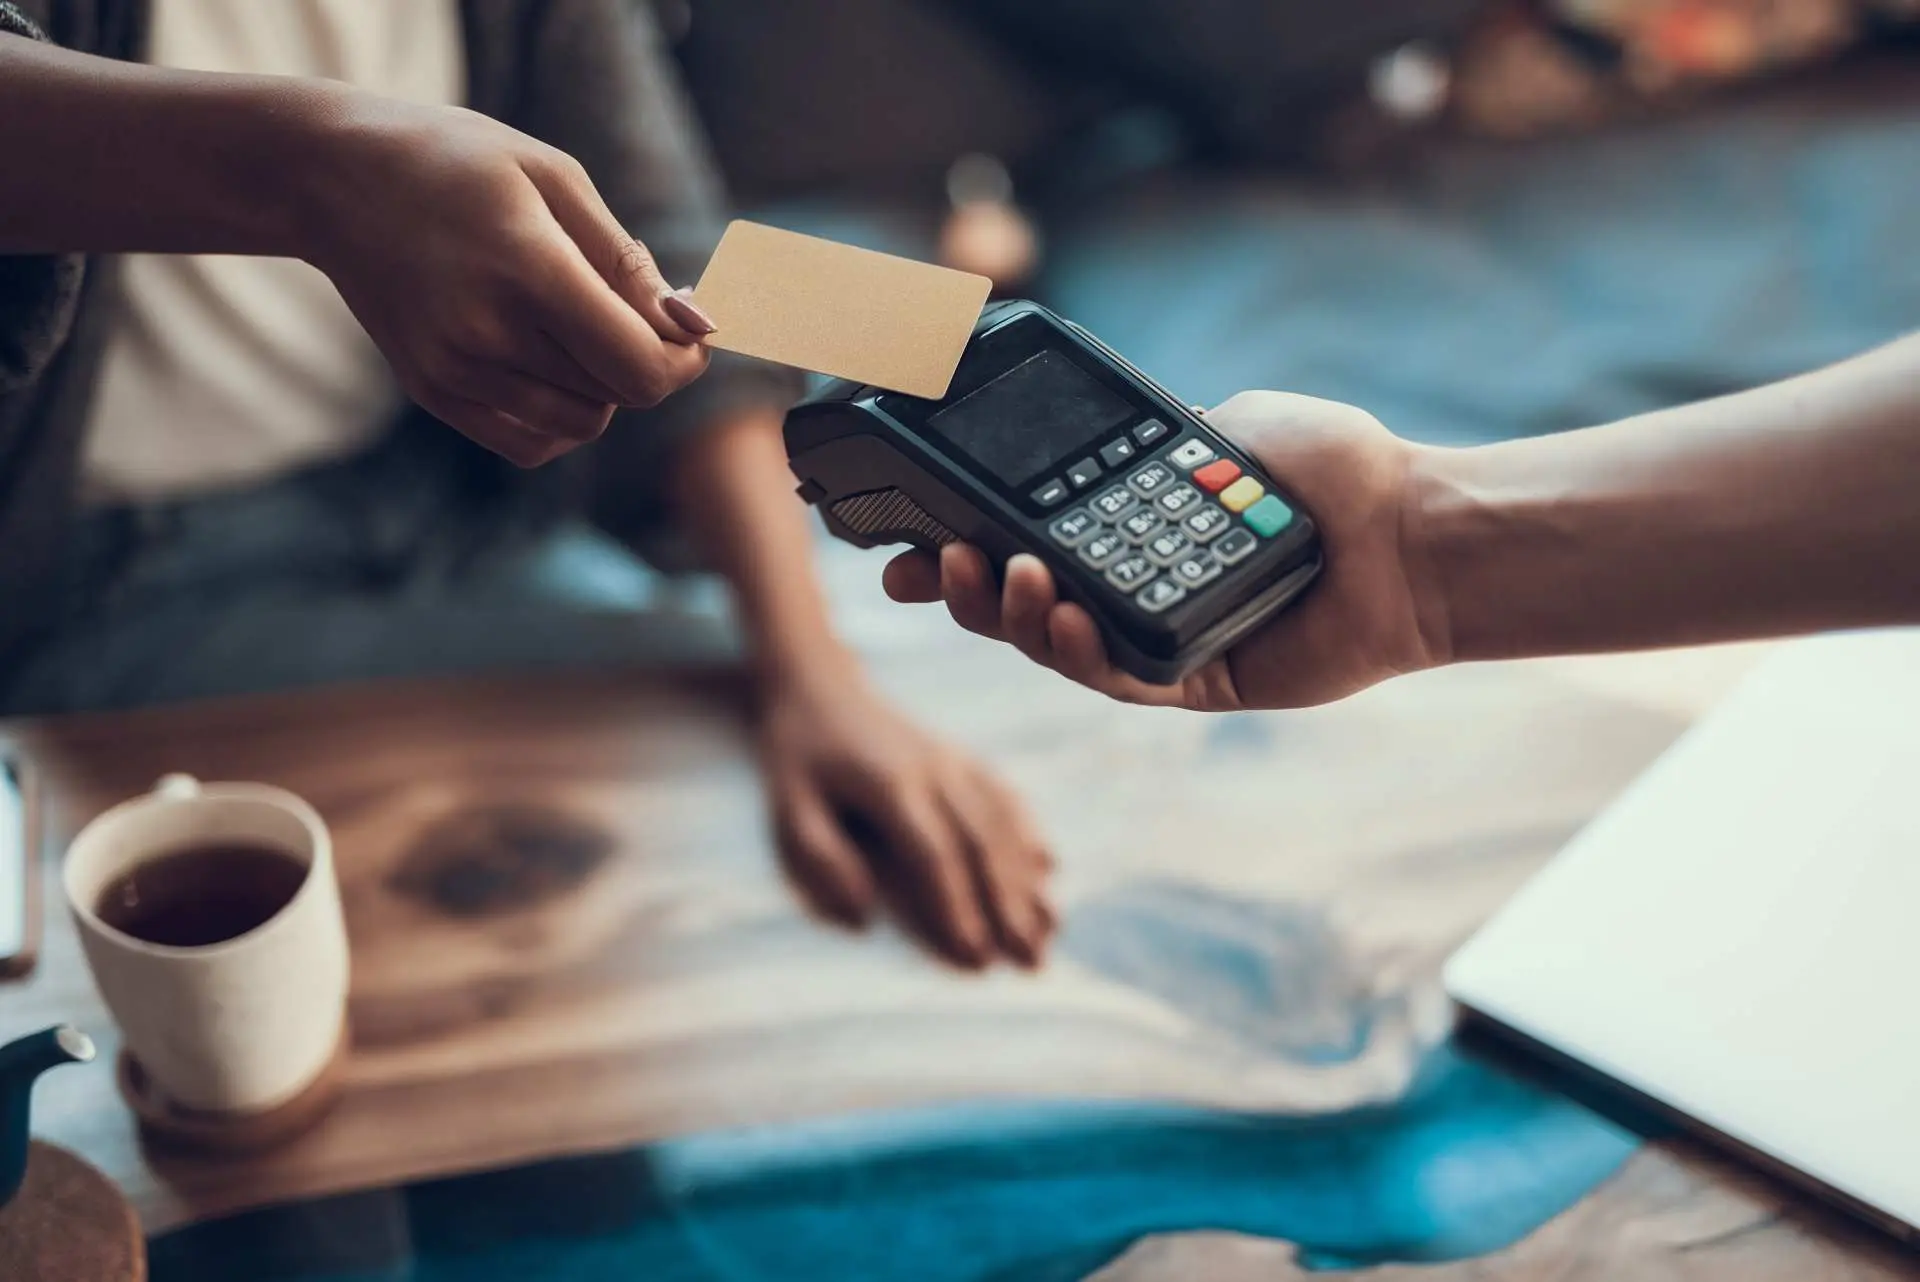 How to maximise your gains as a merchant with optimised contactless payments